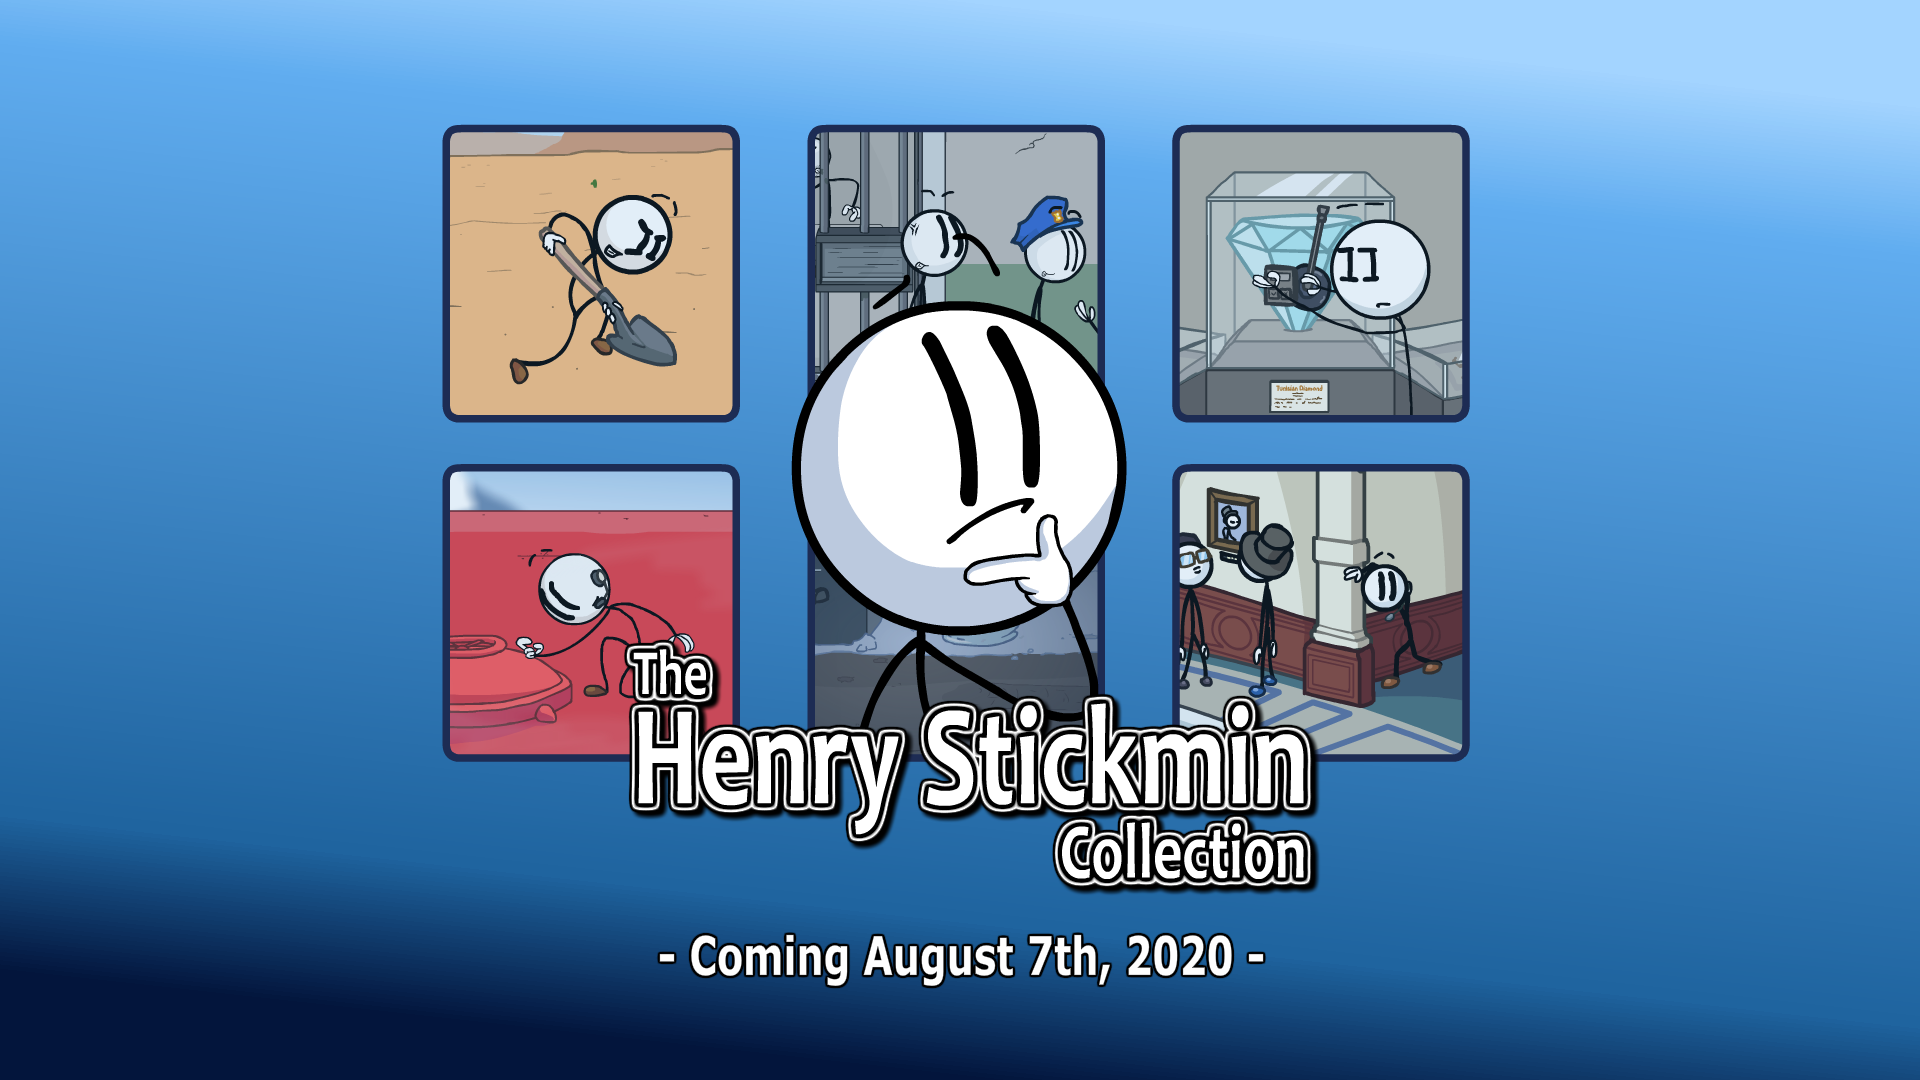 will the henry stickmin collection